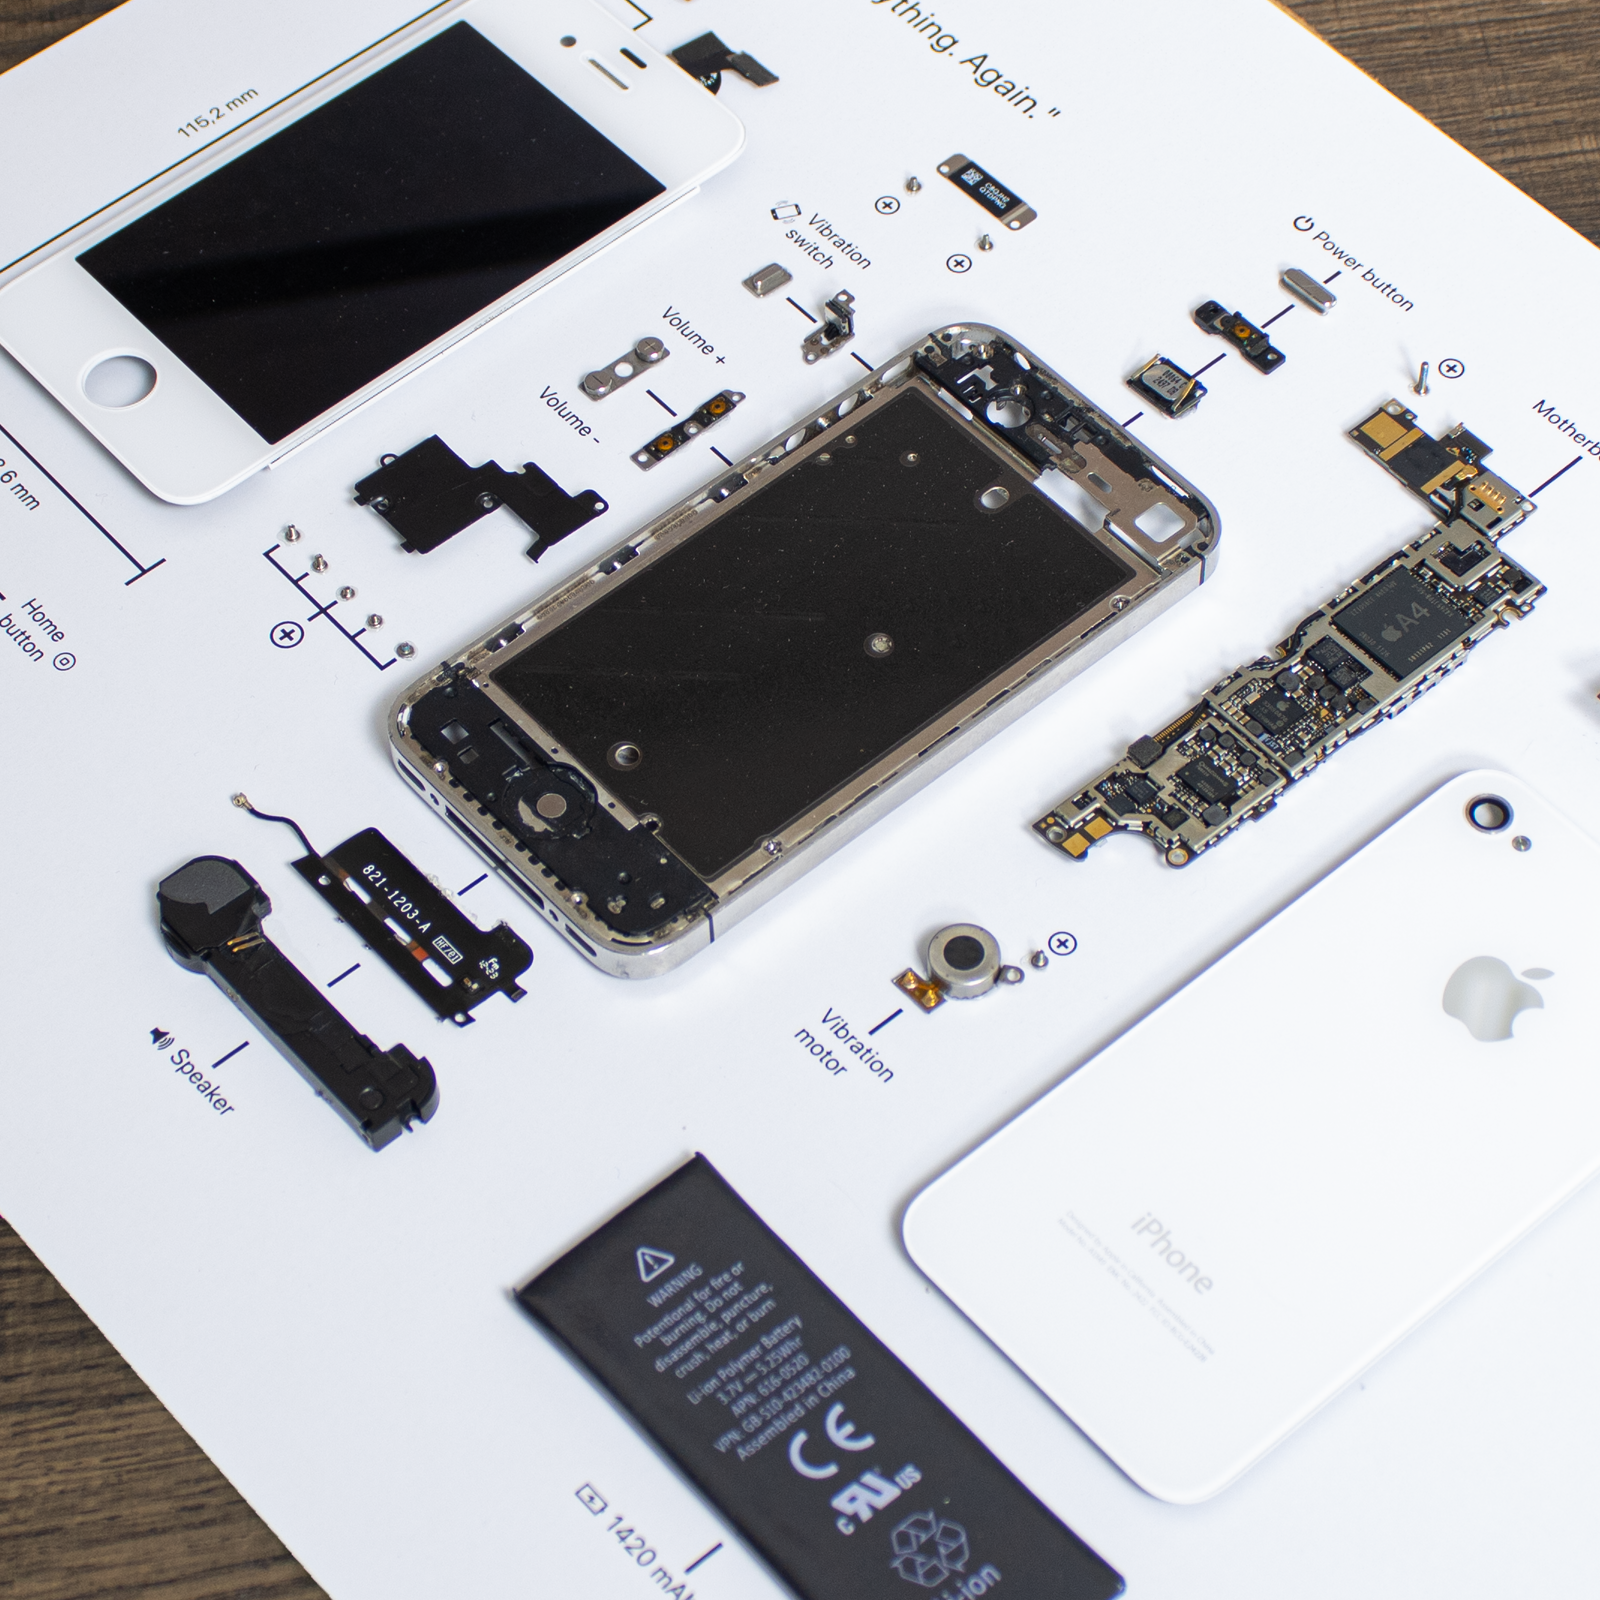 iPhone 4 USA disassembled in a frame